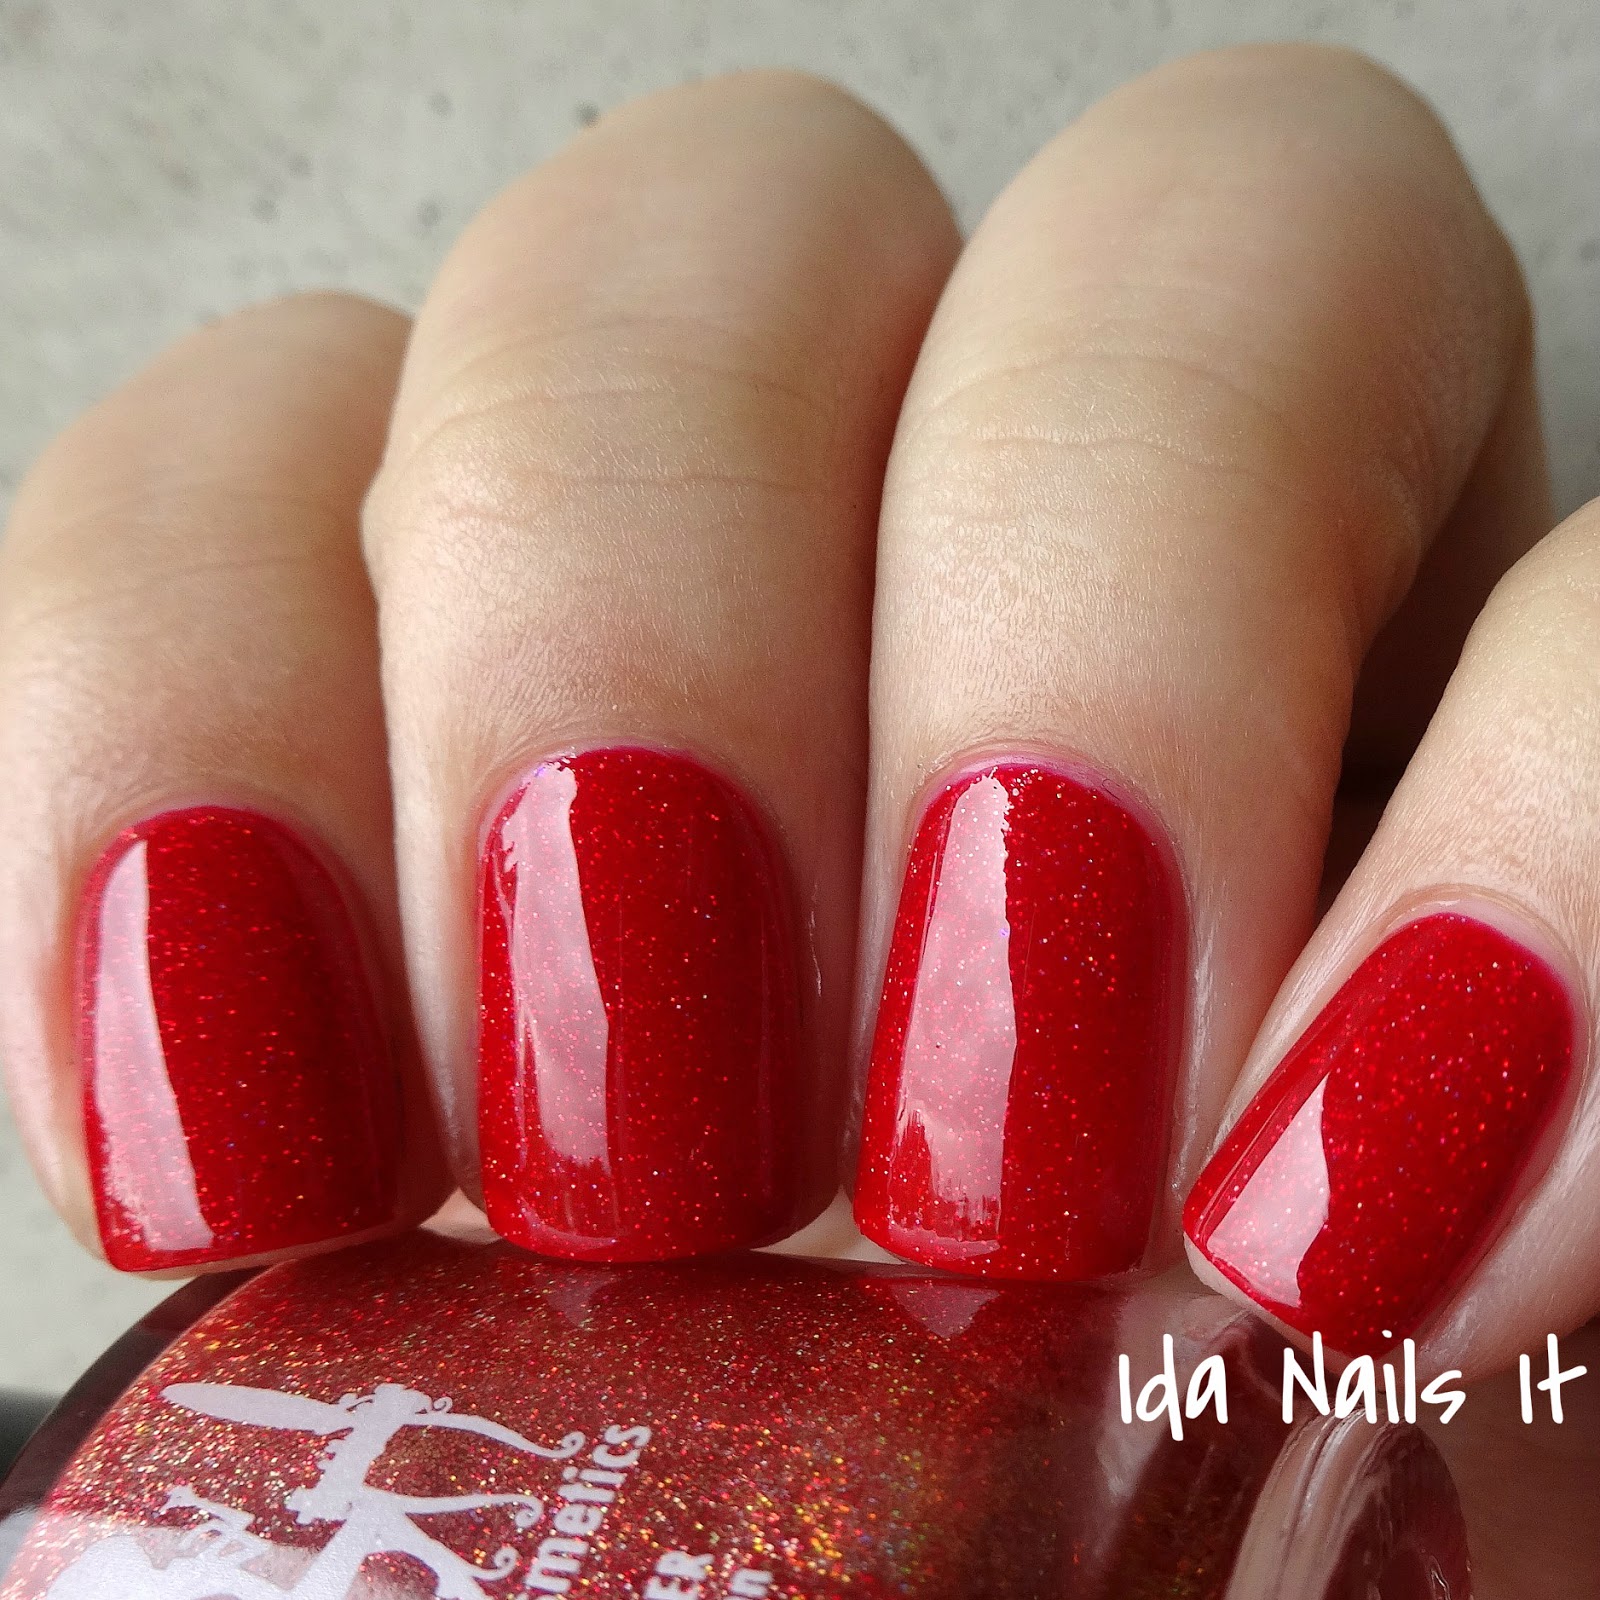 Ida Nails It: Girly Bits Holiday Magic Collection: Swatches and Review